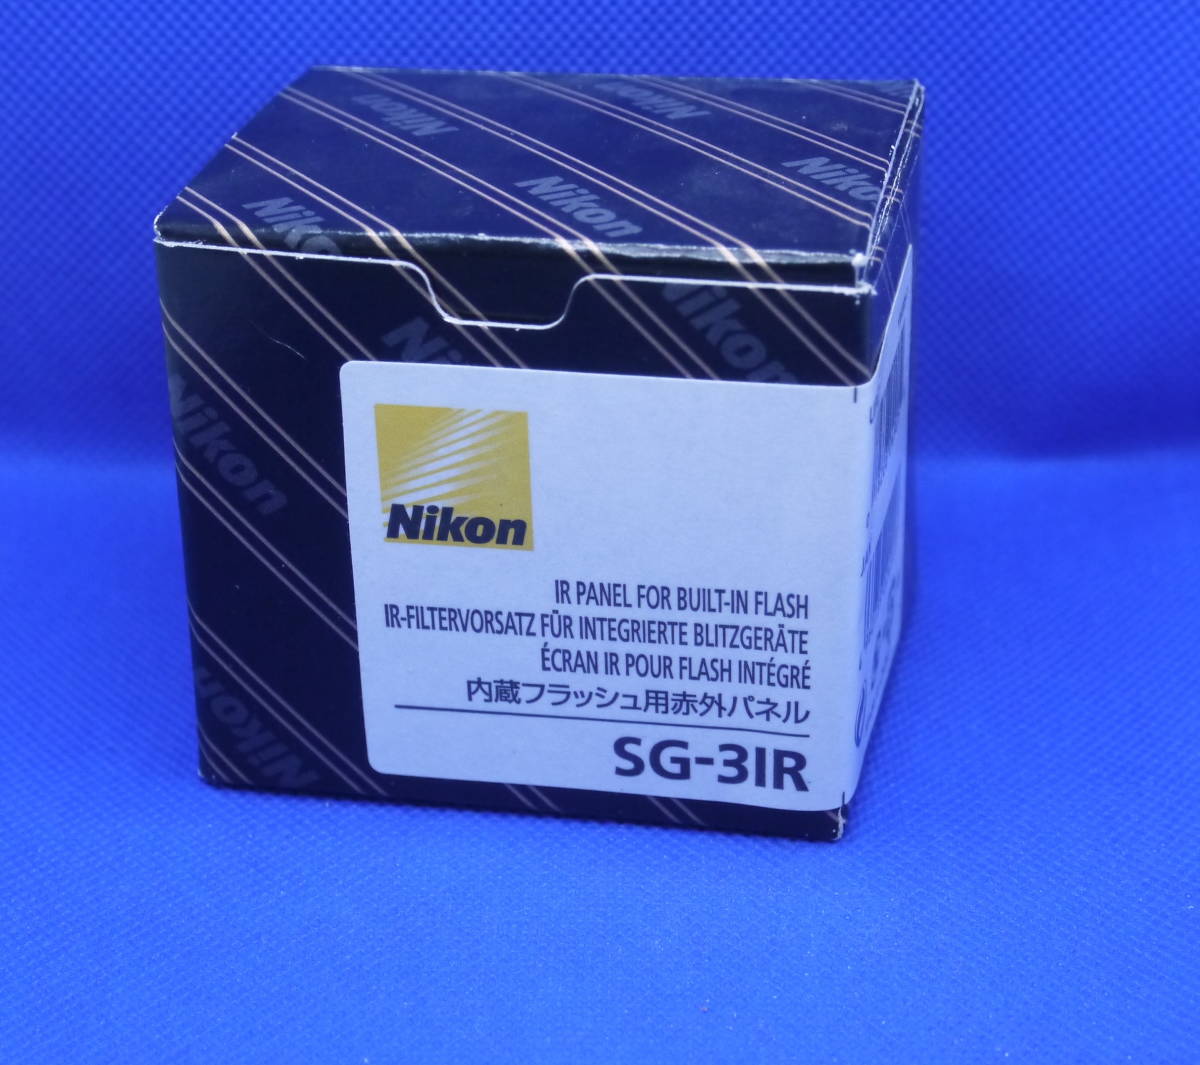 Nikon / Nikon [ SG-31R ] built-in flash for red out panel finest quality goods!!